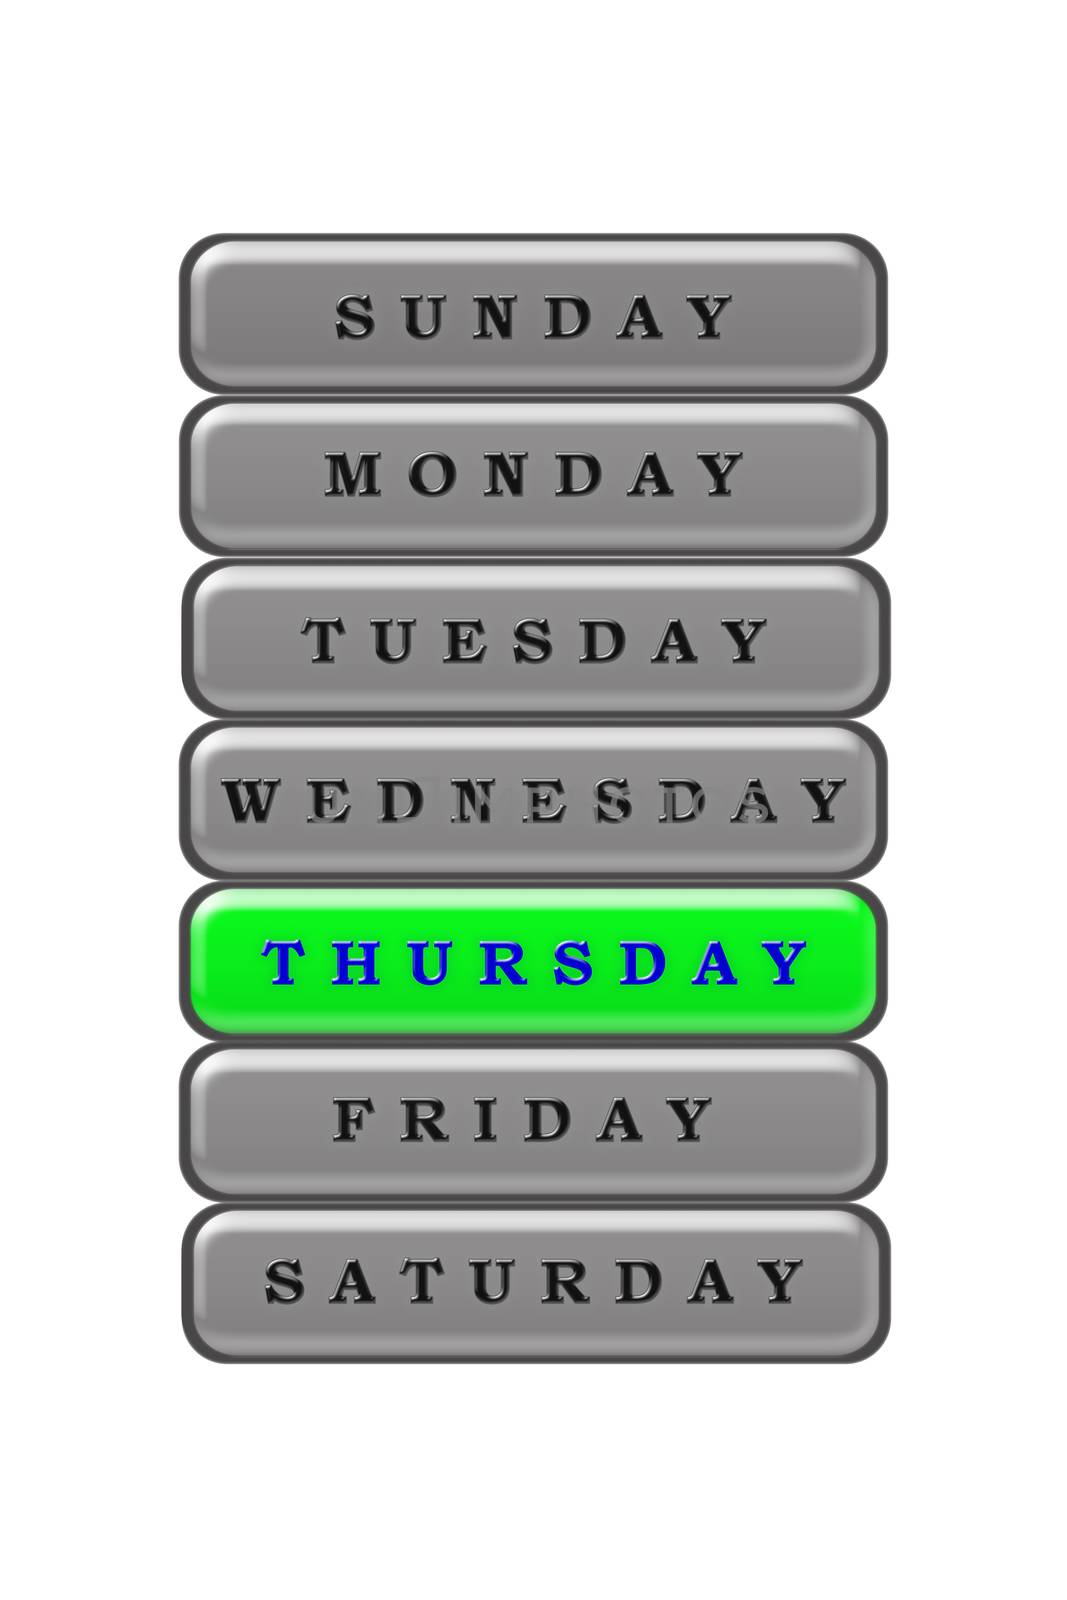 Among the days of the week, Thursday is highlighted in blue on a green background.